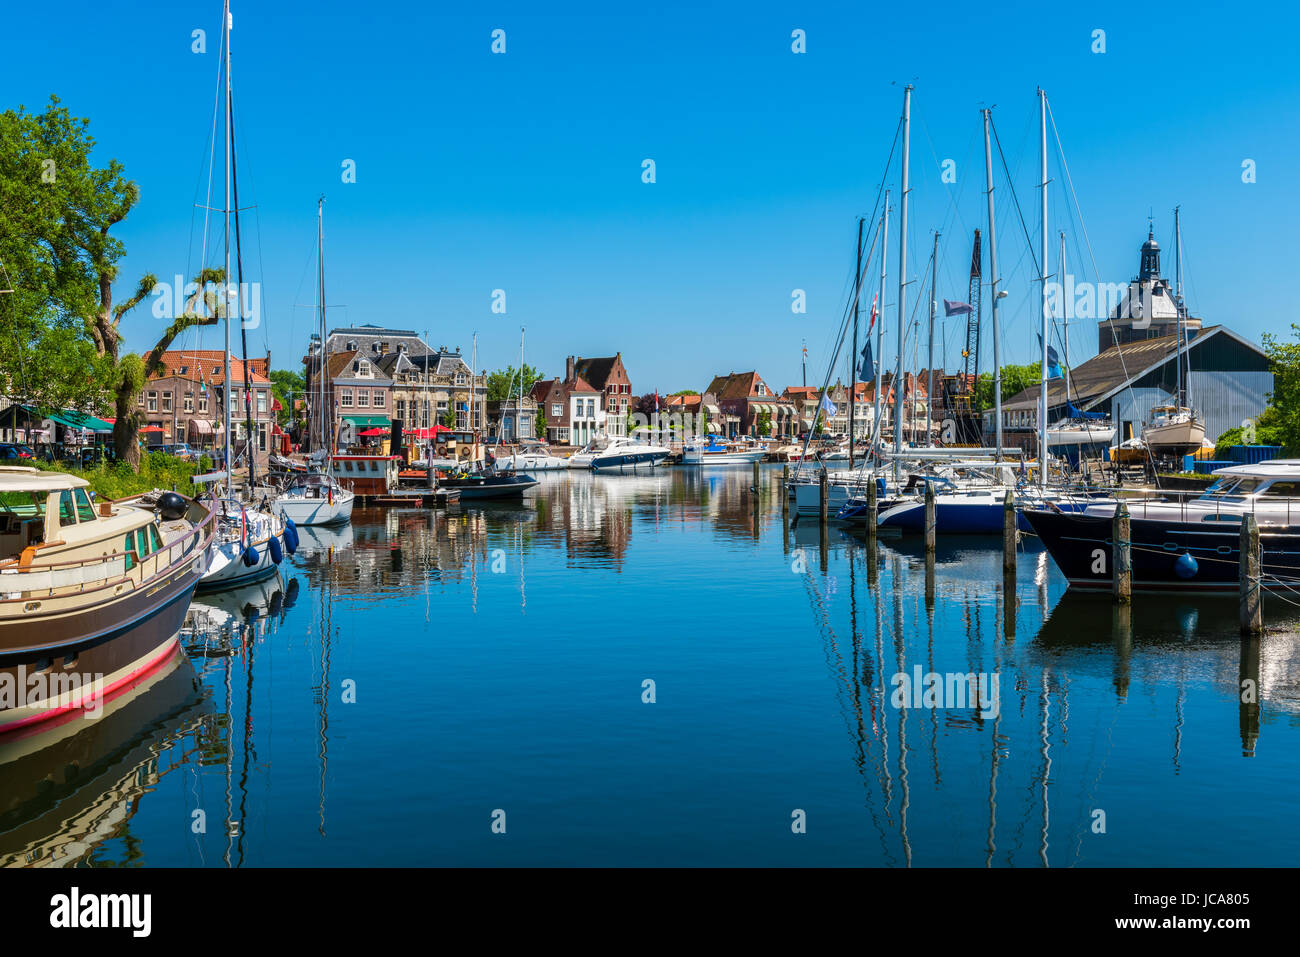 Marina in Canal in City Center of Enkhuizen Netherlands Stock Photo